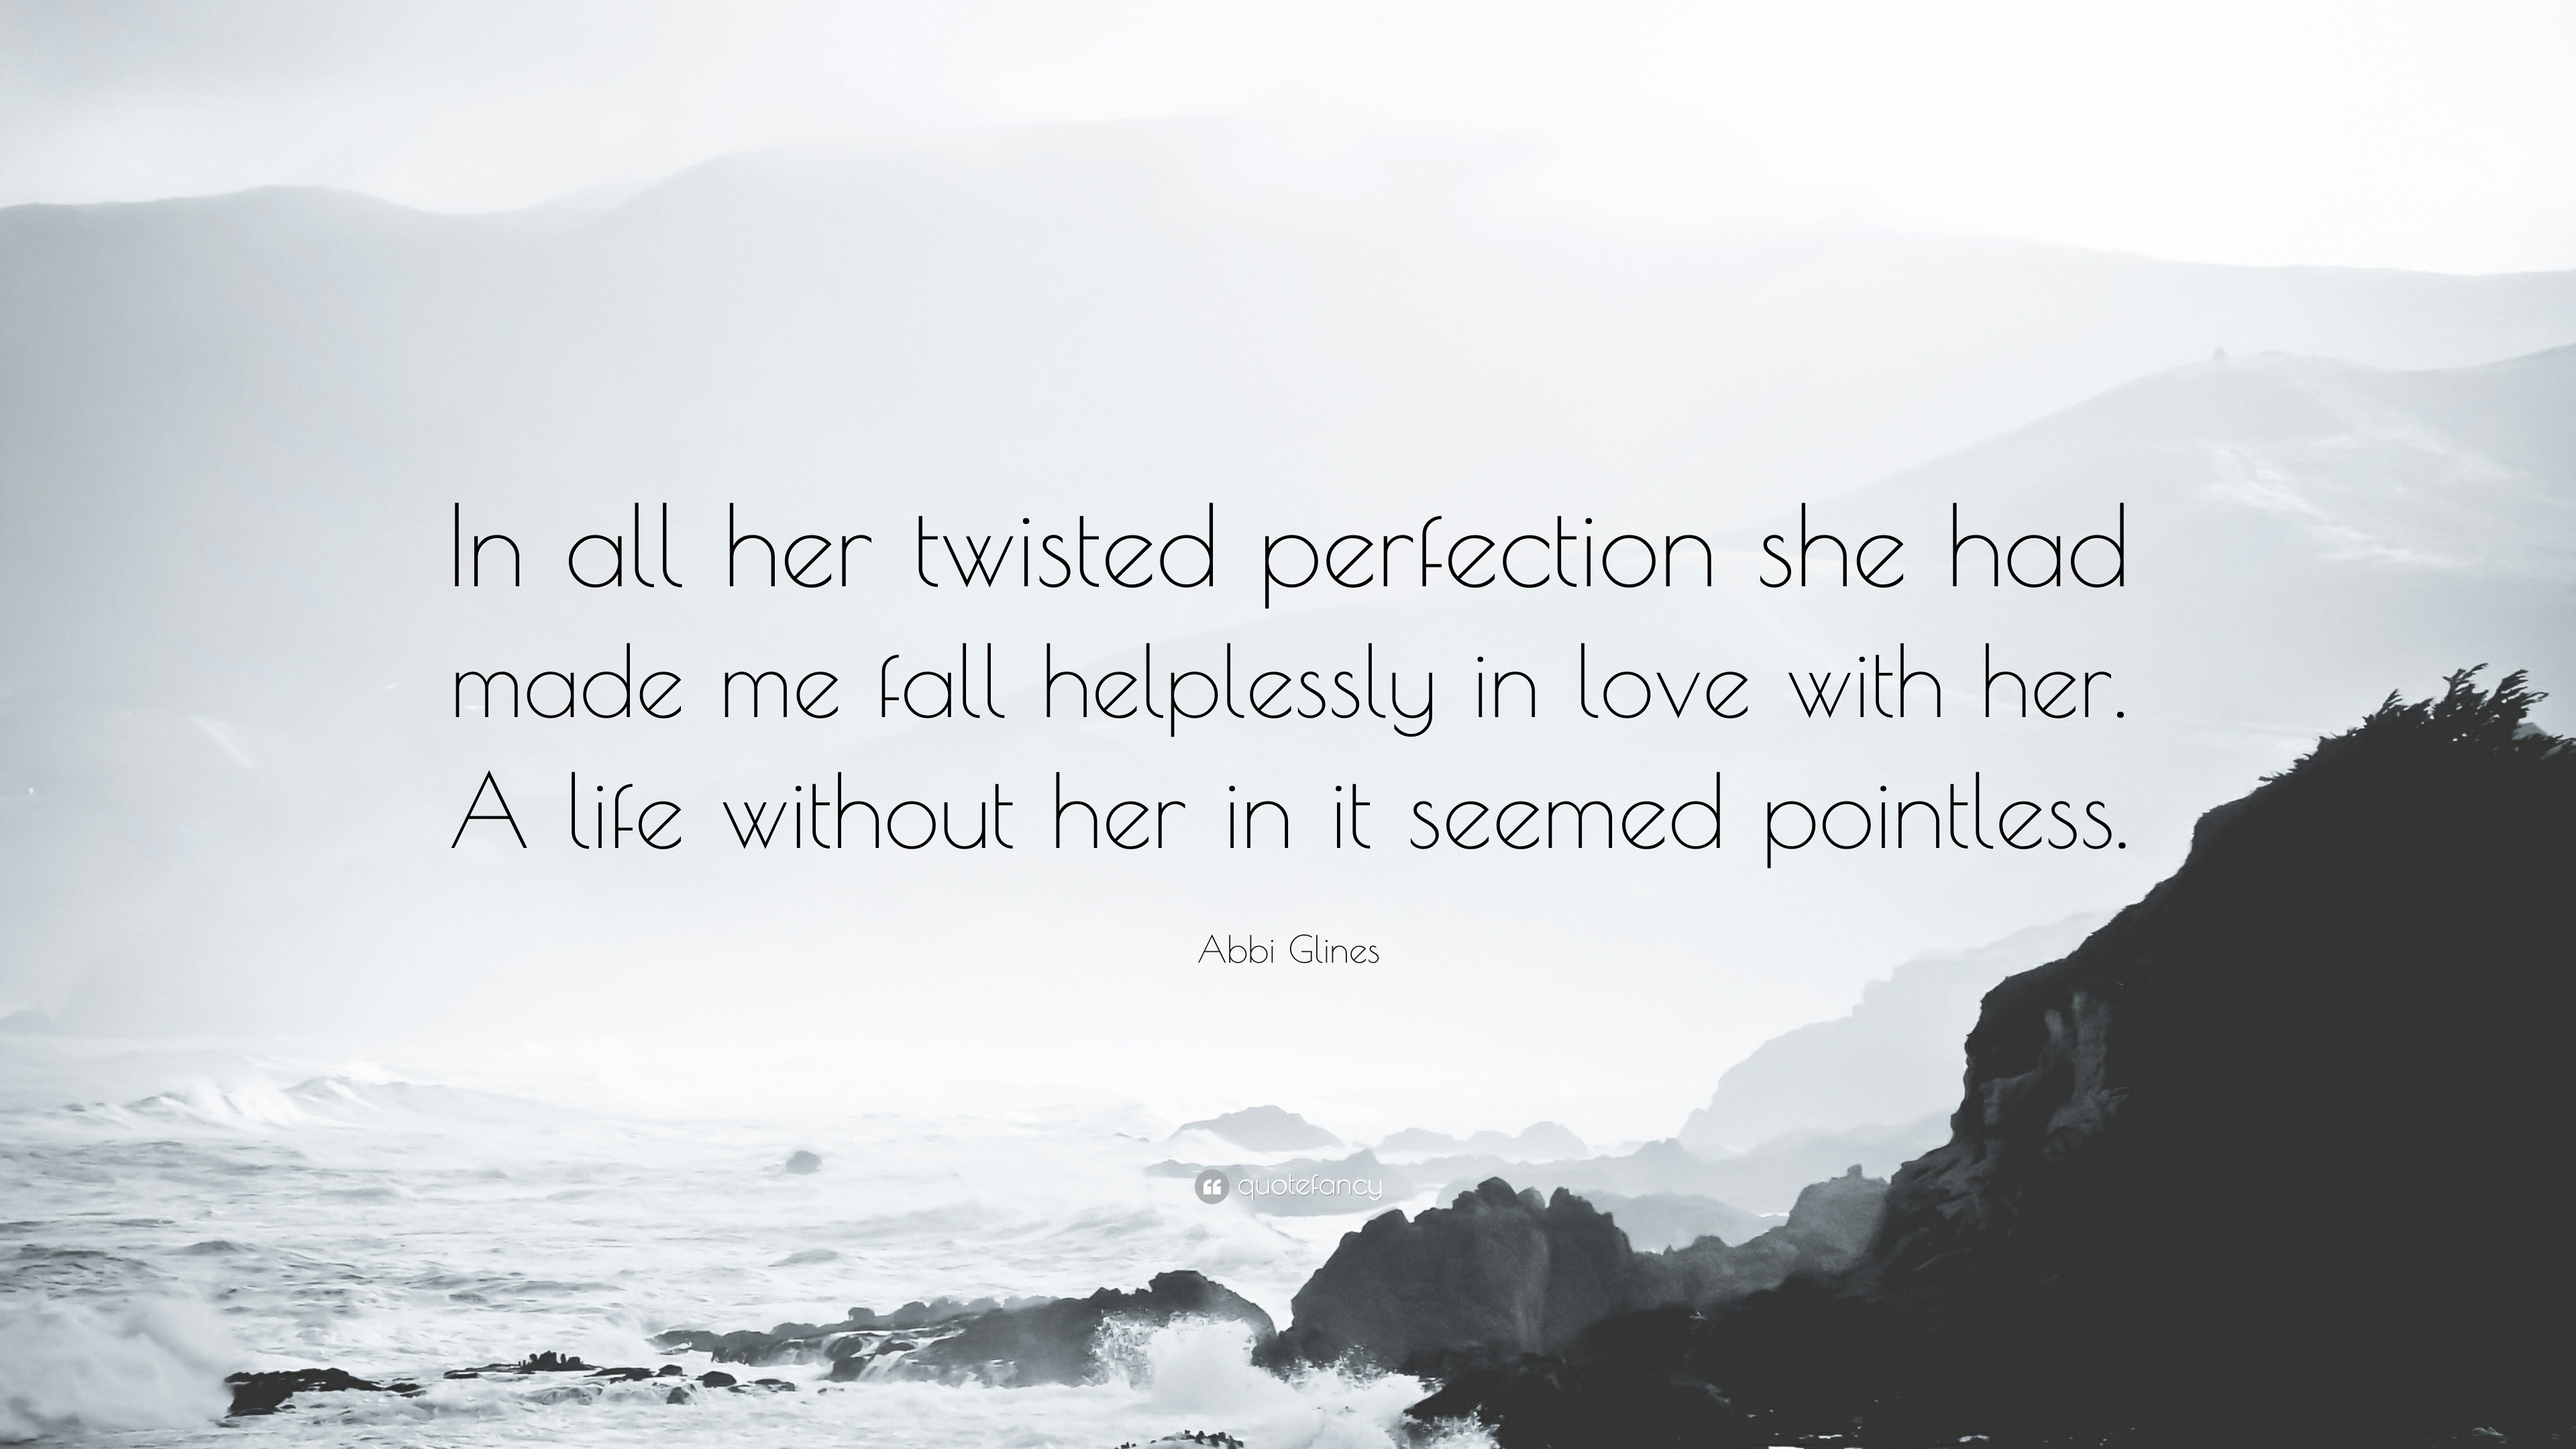 Abbi Glines Quote “In all her twisted perfection she had made me fall helplessly